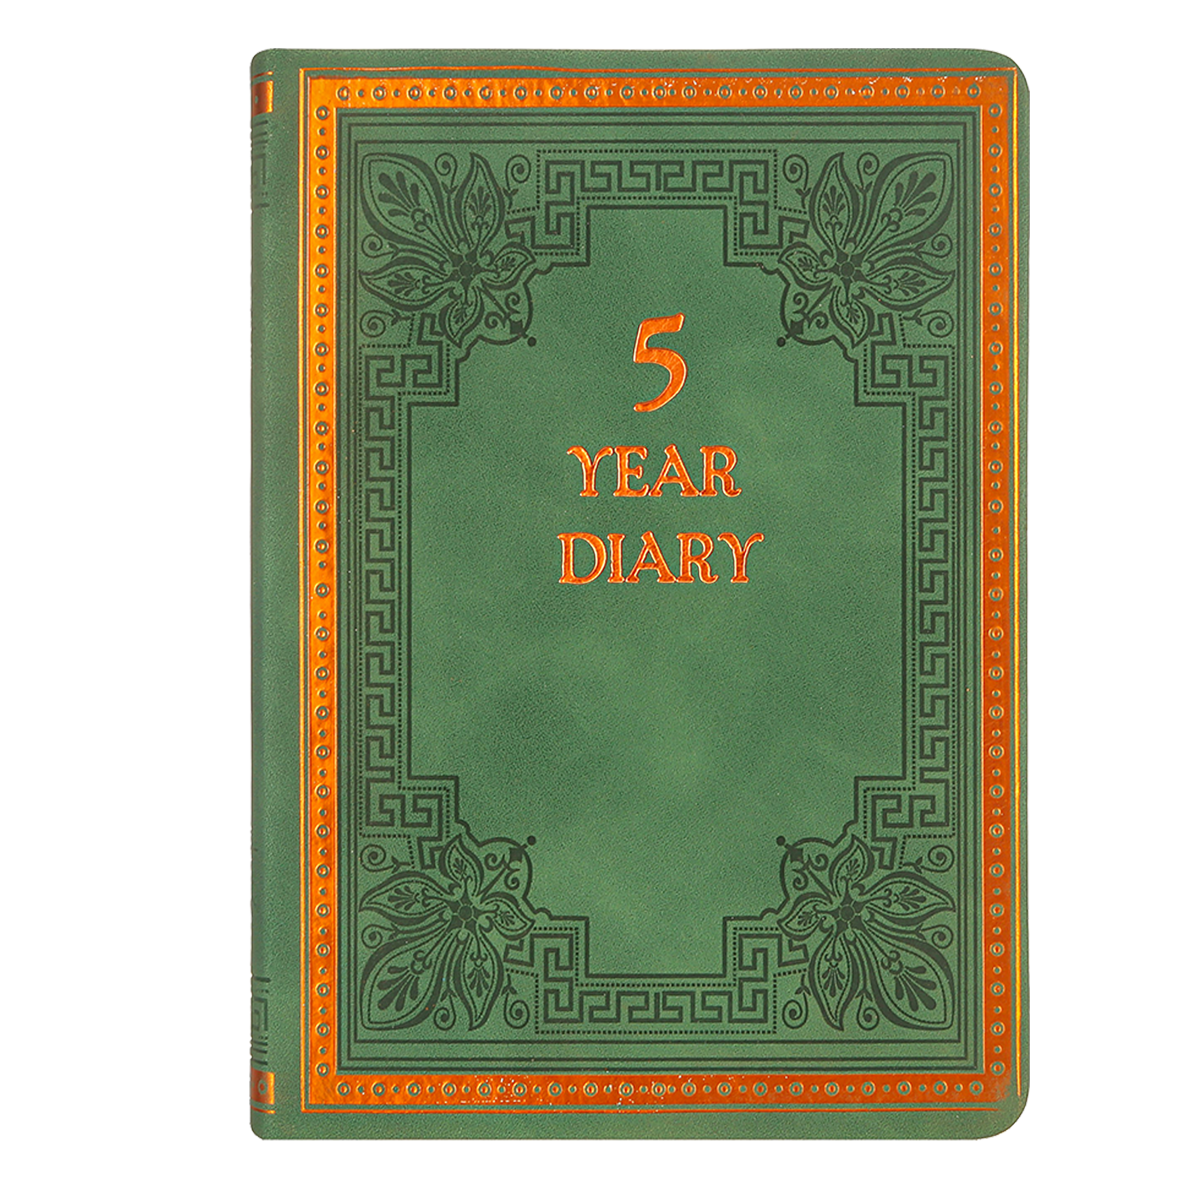 Five-Year Vintage Look Diary (Motivational, Prayer, Gratitude, Mindfulness, Self-Help and Daily Affirmations) 4.64x6.6", 394p. (Green)